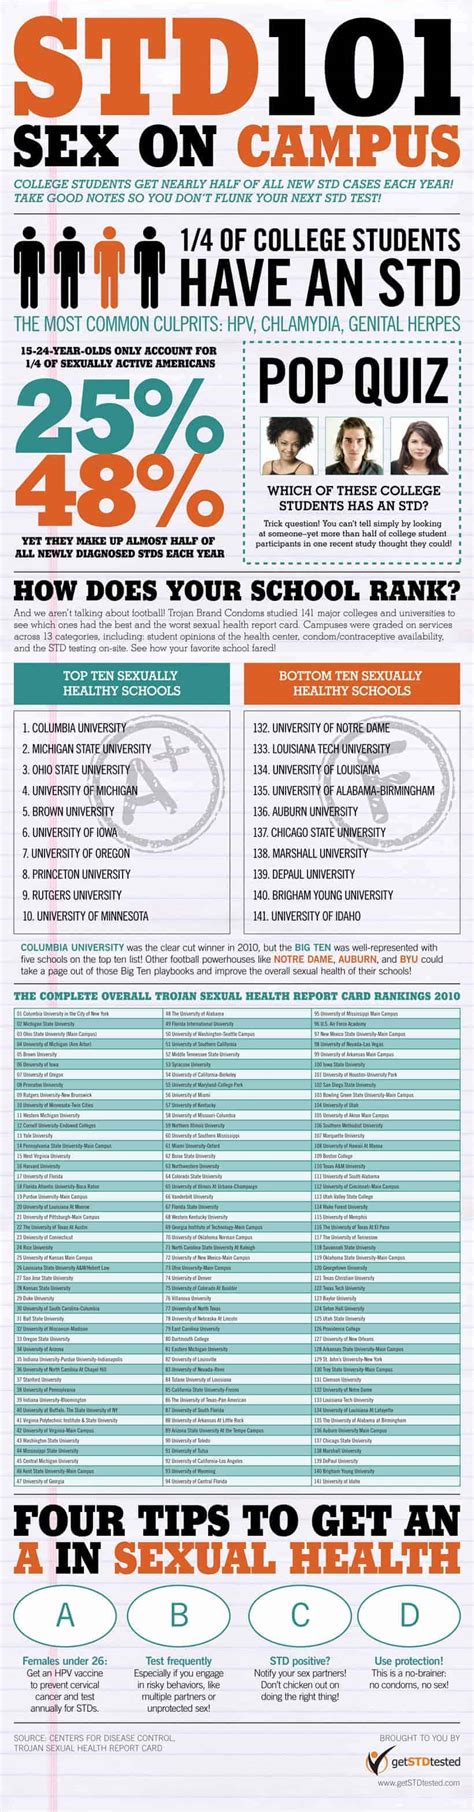 Schools Out But The Doctors In Daily Infographic